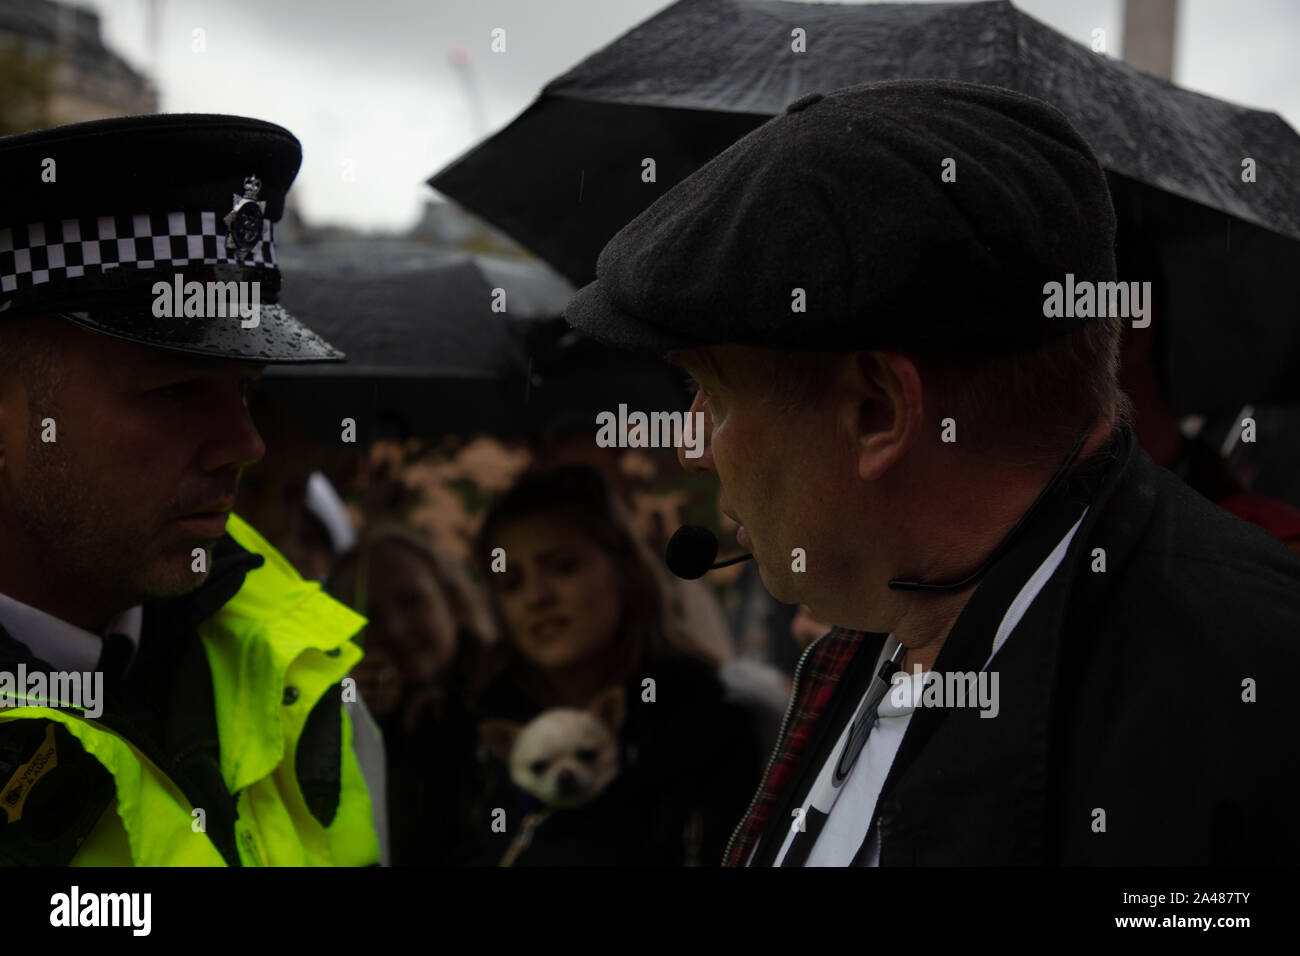 London, UK. 12th October 2019. Police officer seen having a word with an anti-extinction rebellion protester on Trafalgar Square,  during the Extinction Rebellion two week long protest in London. Credit: Joe Kuis / Alamy News Stock Photo